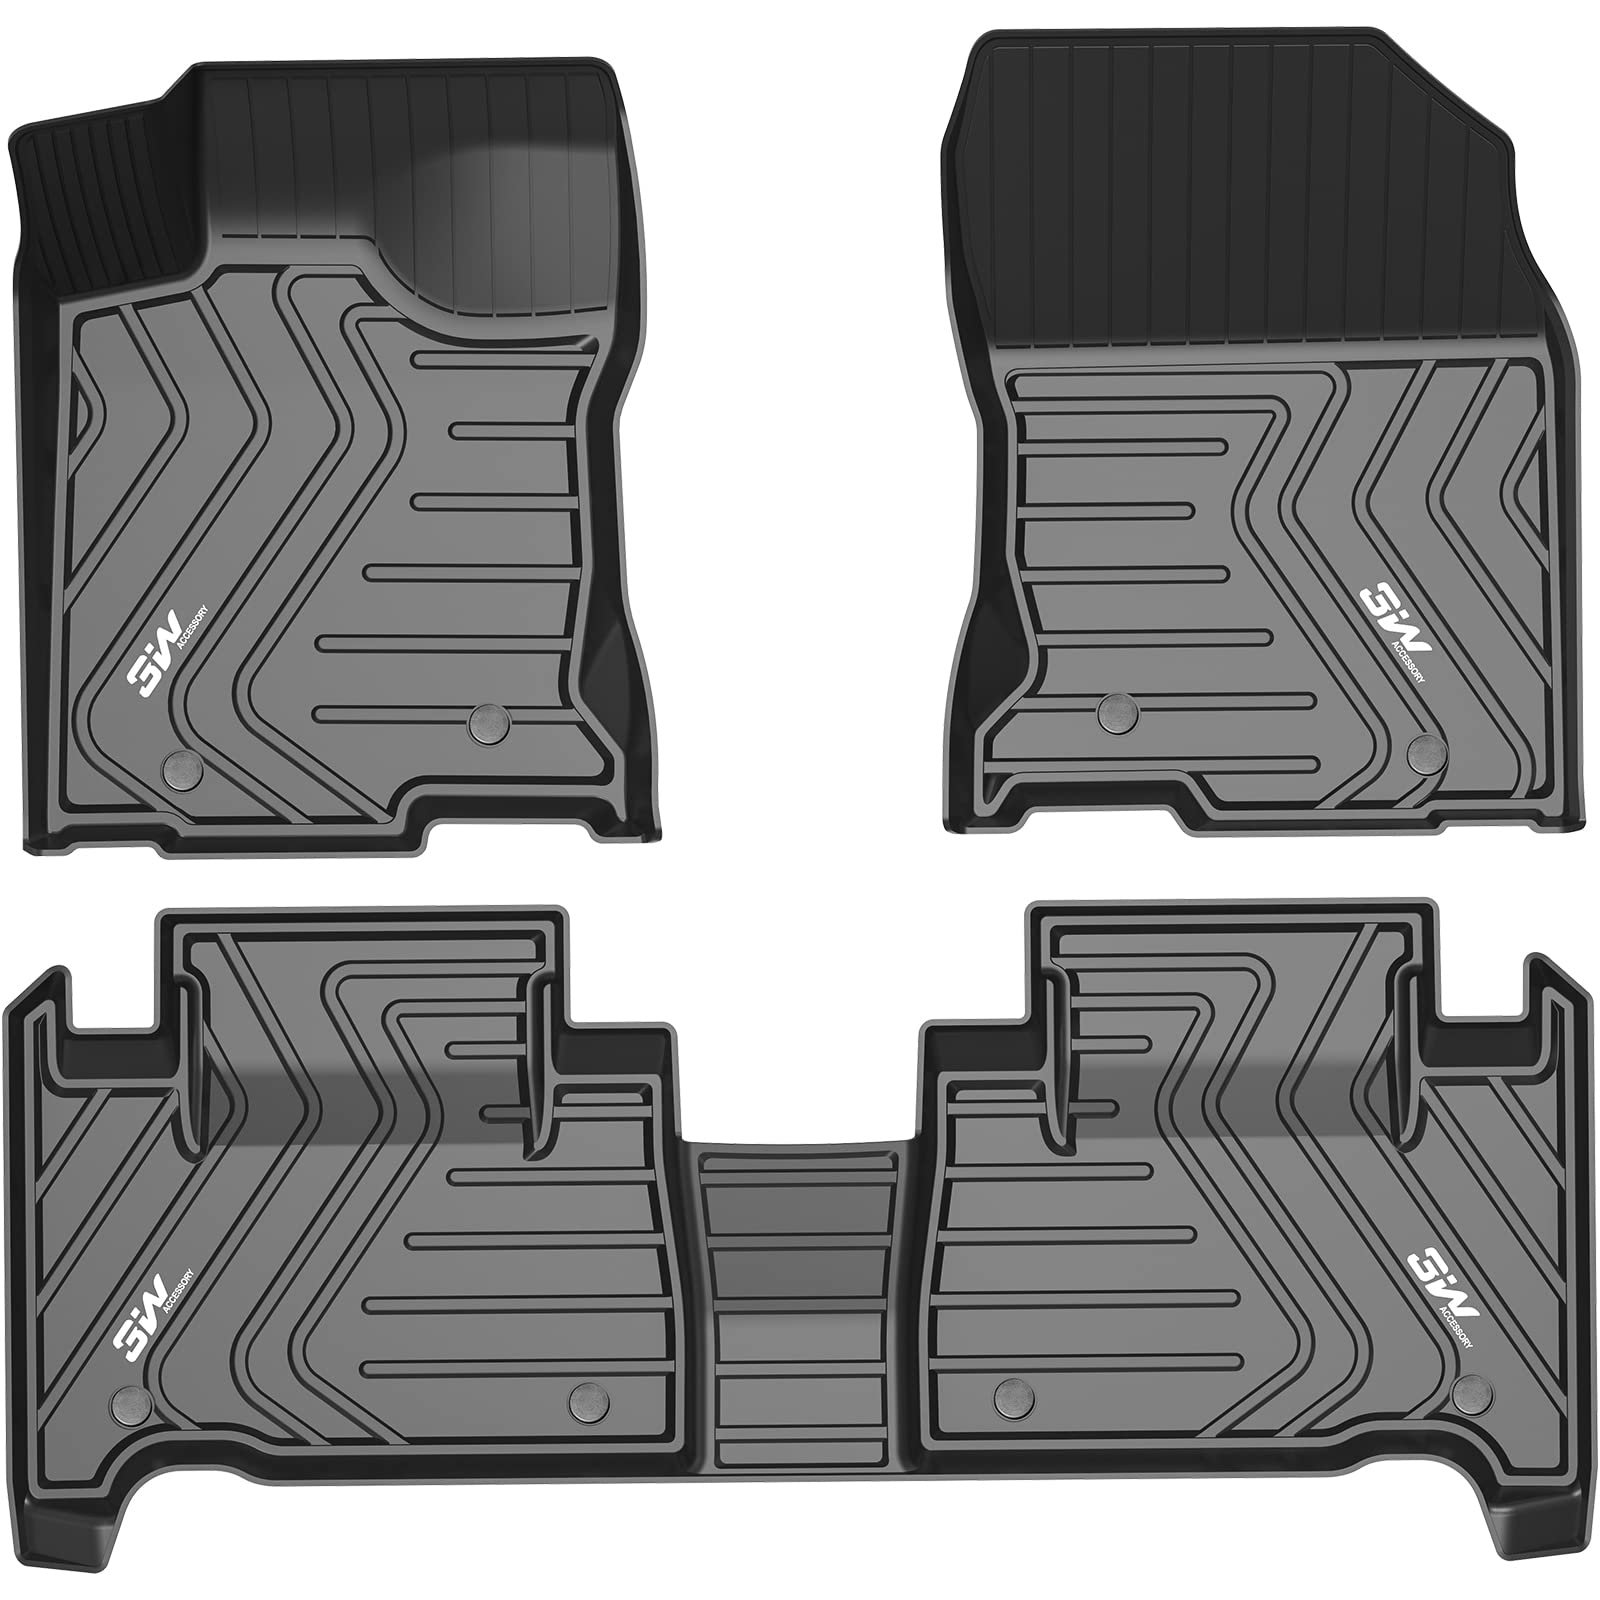 3W Lexus NX 2015-2023 (NX200t/NX300/NX300h) Custom Floor Mats TPE Material & All-Weather Protection Vehicles & Parts 3Wliners 2015-2021 NX 2015-2021 1st&2nd Row Mats